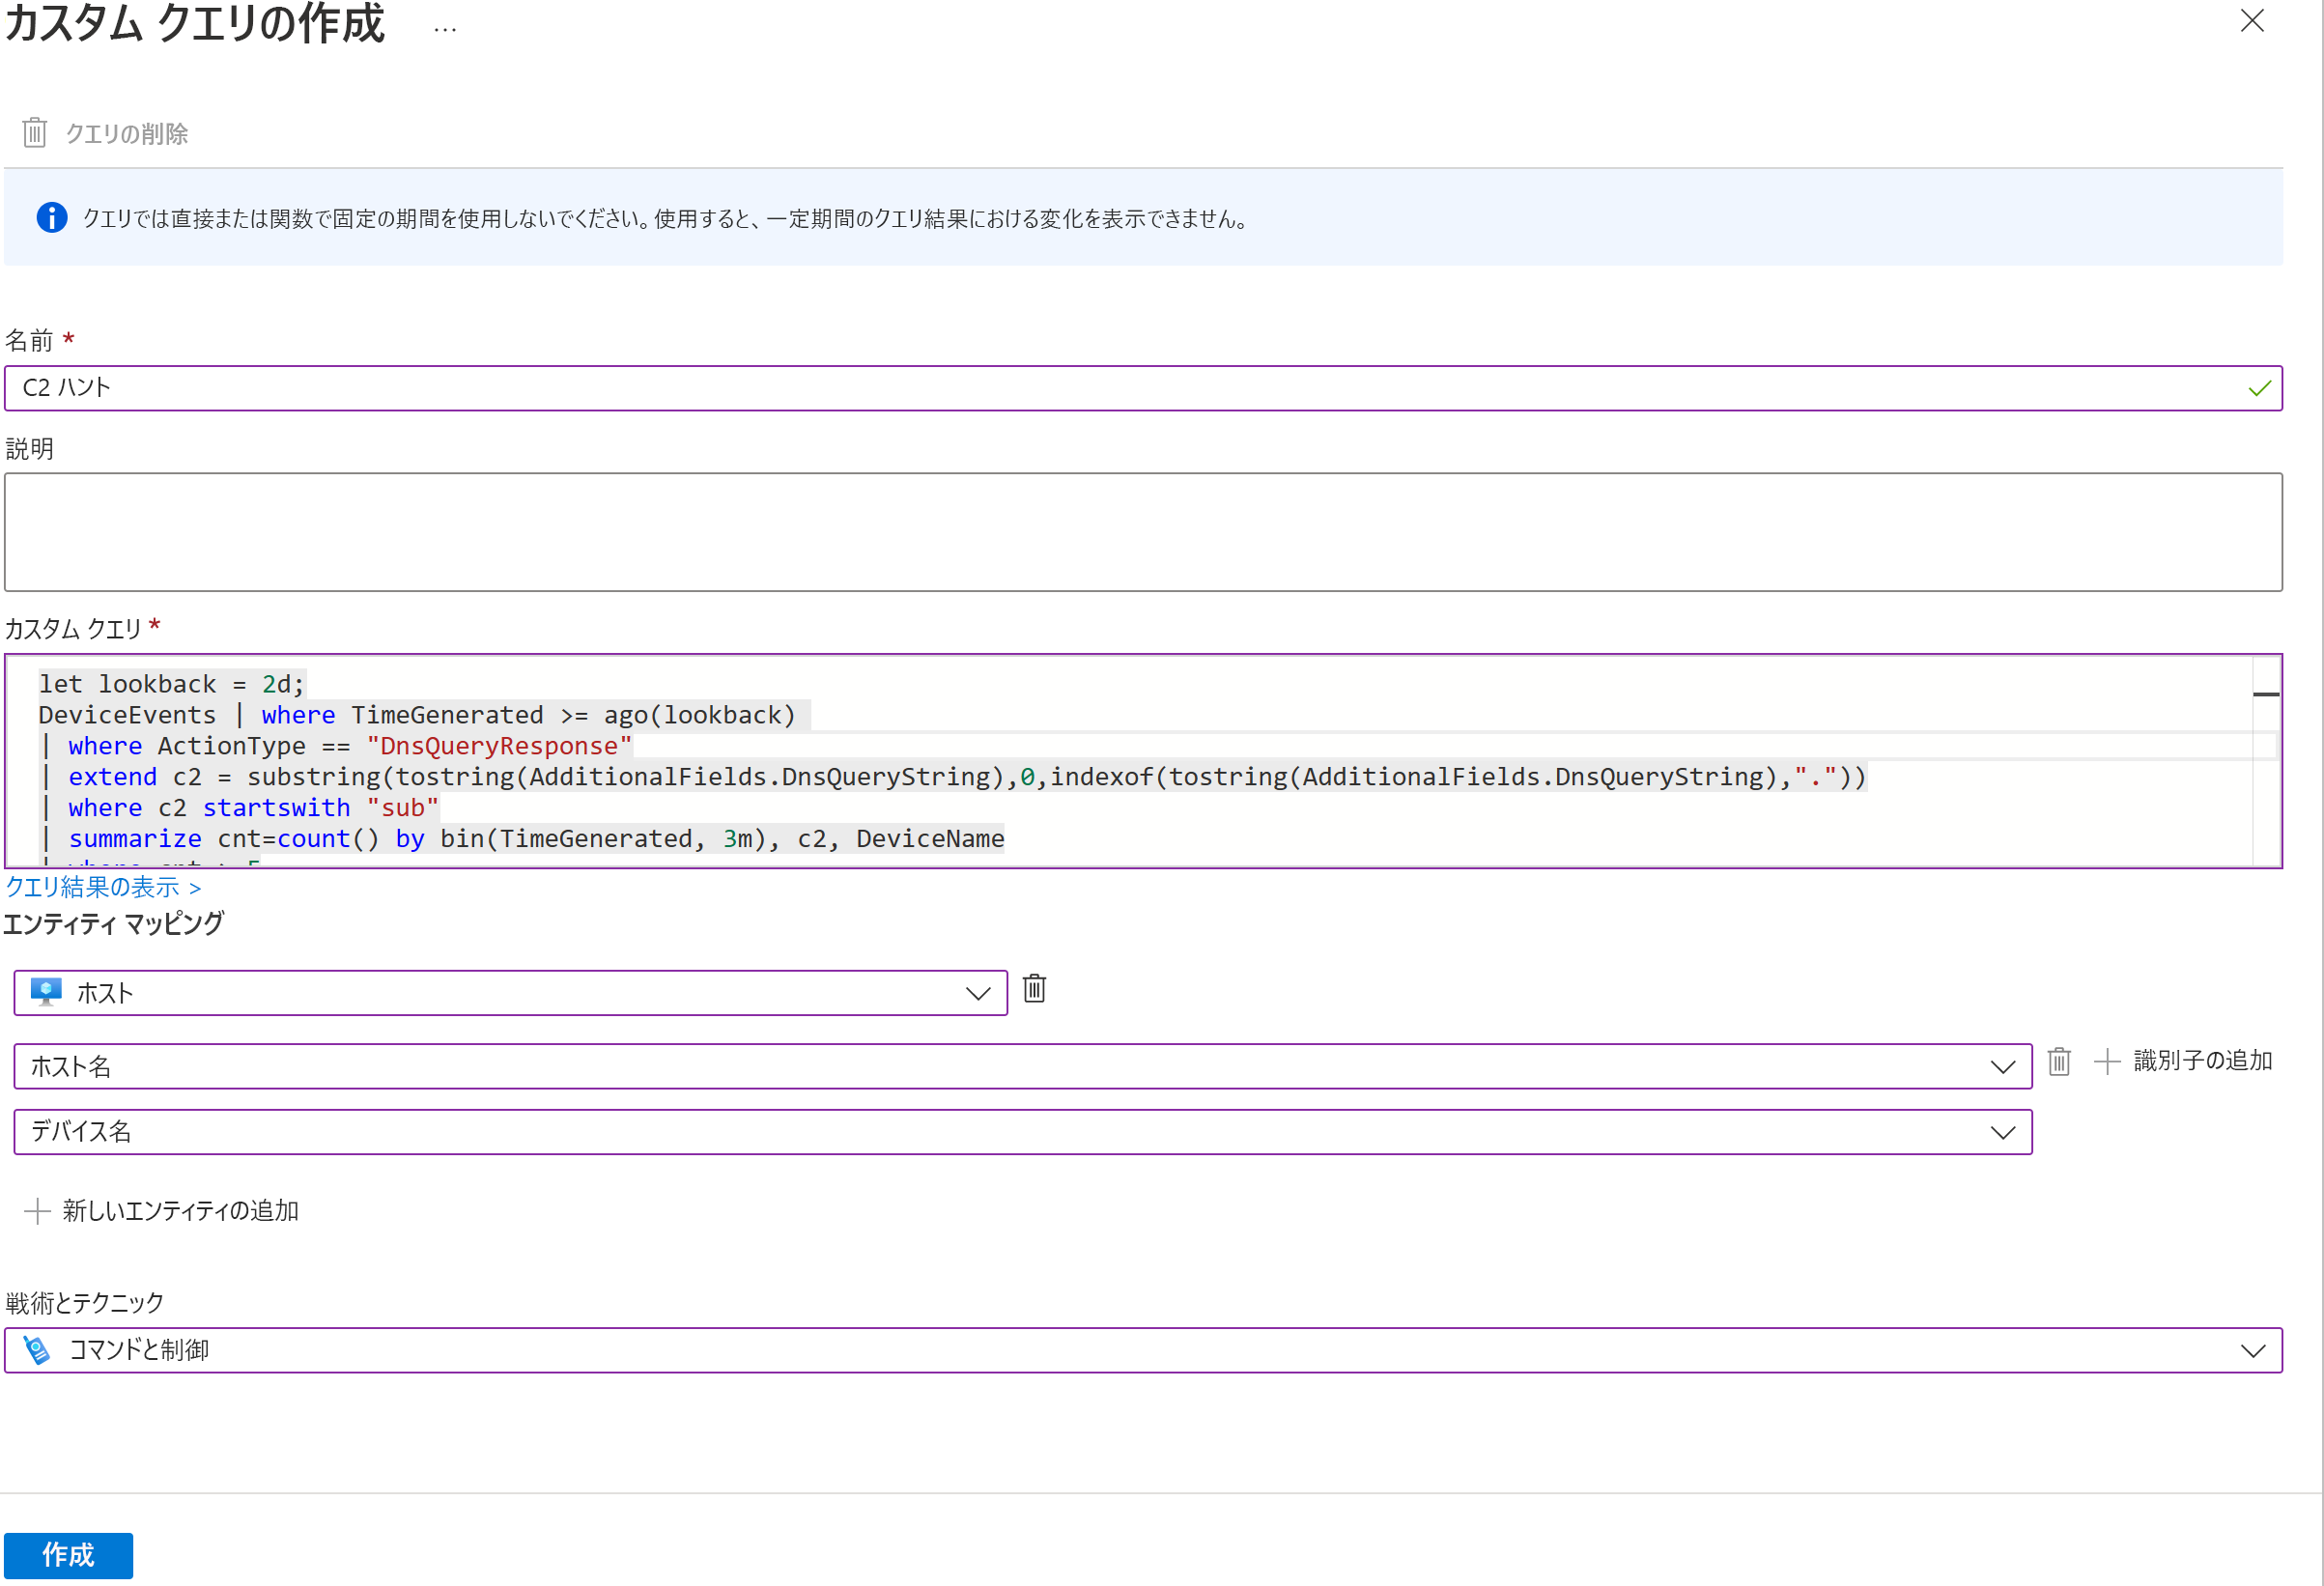 Screenshot that shows the page for creating a custom query in Microsoft Sentinel.